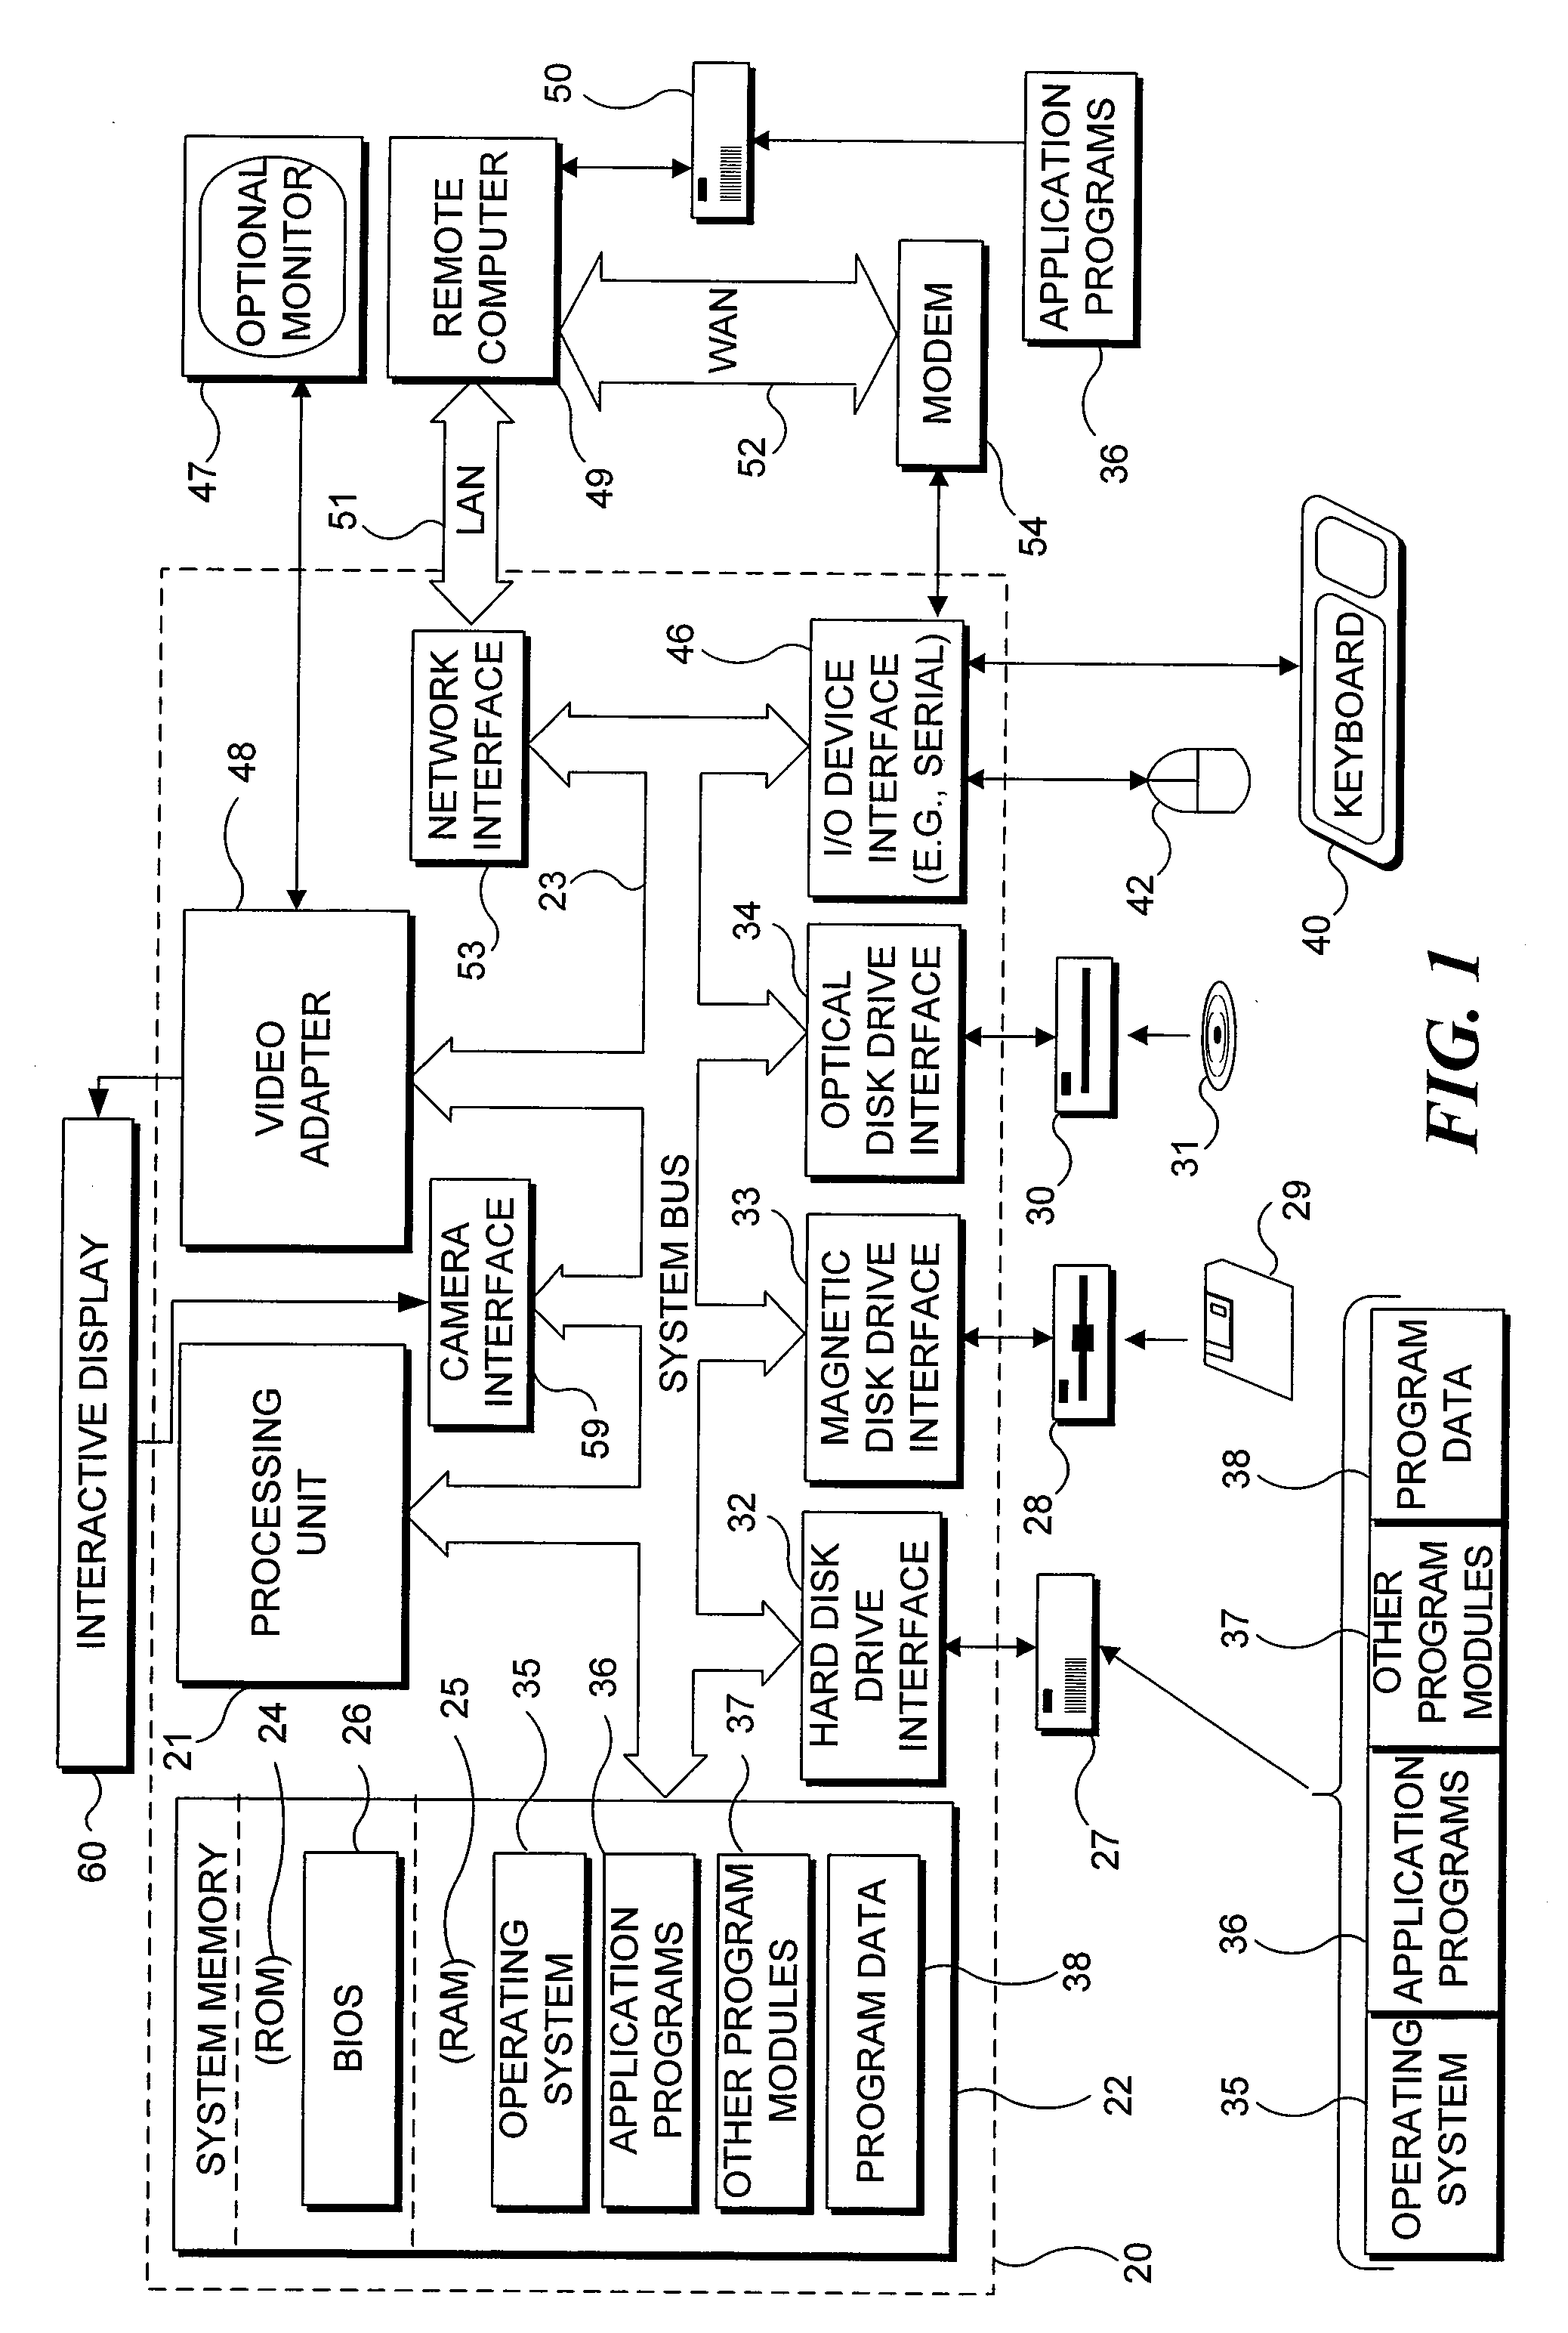 Method and system for reducing effects of undesired signals in an infrared imaging system